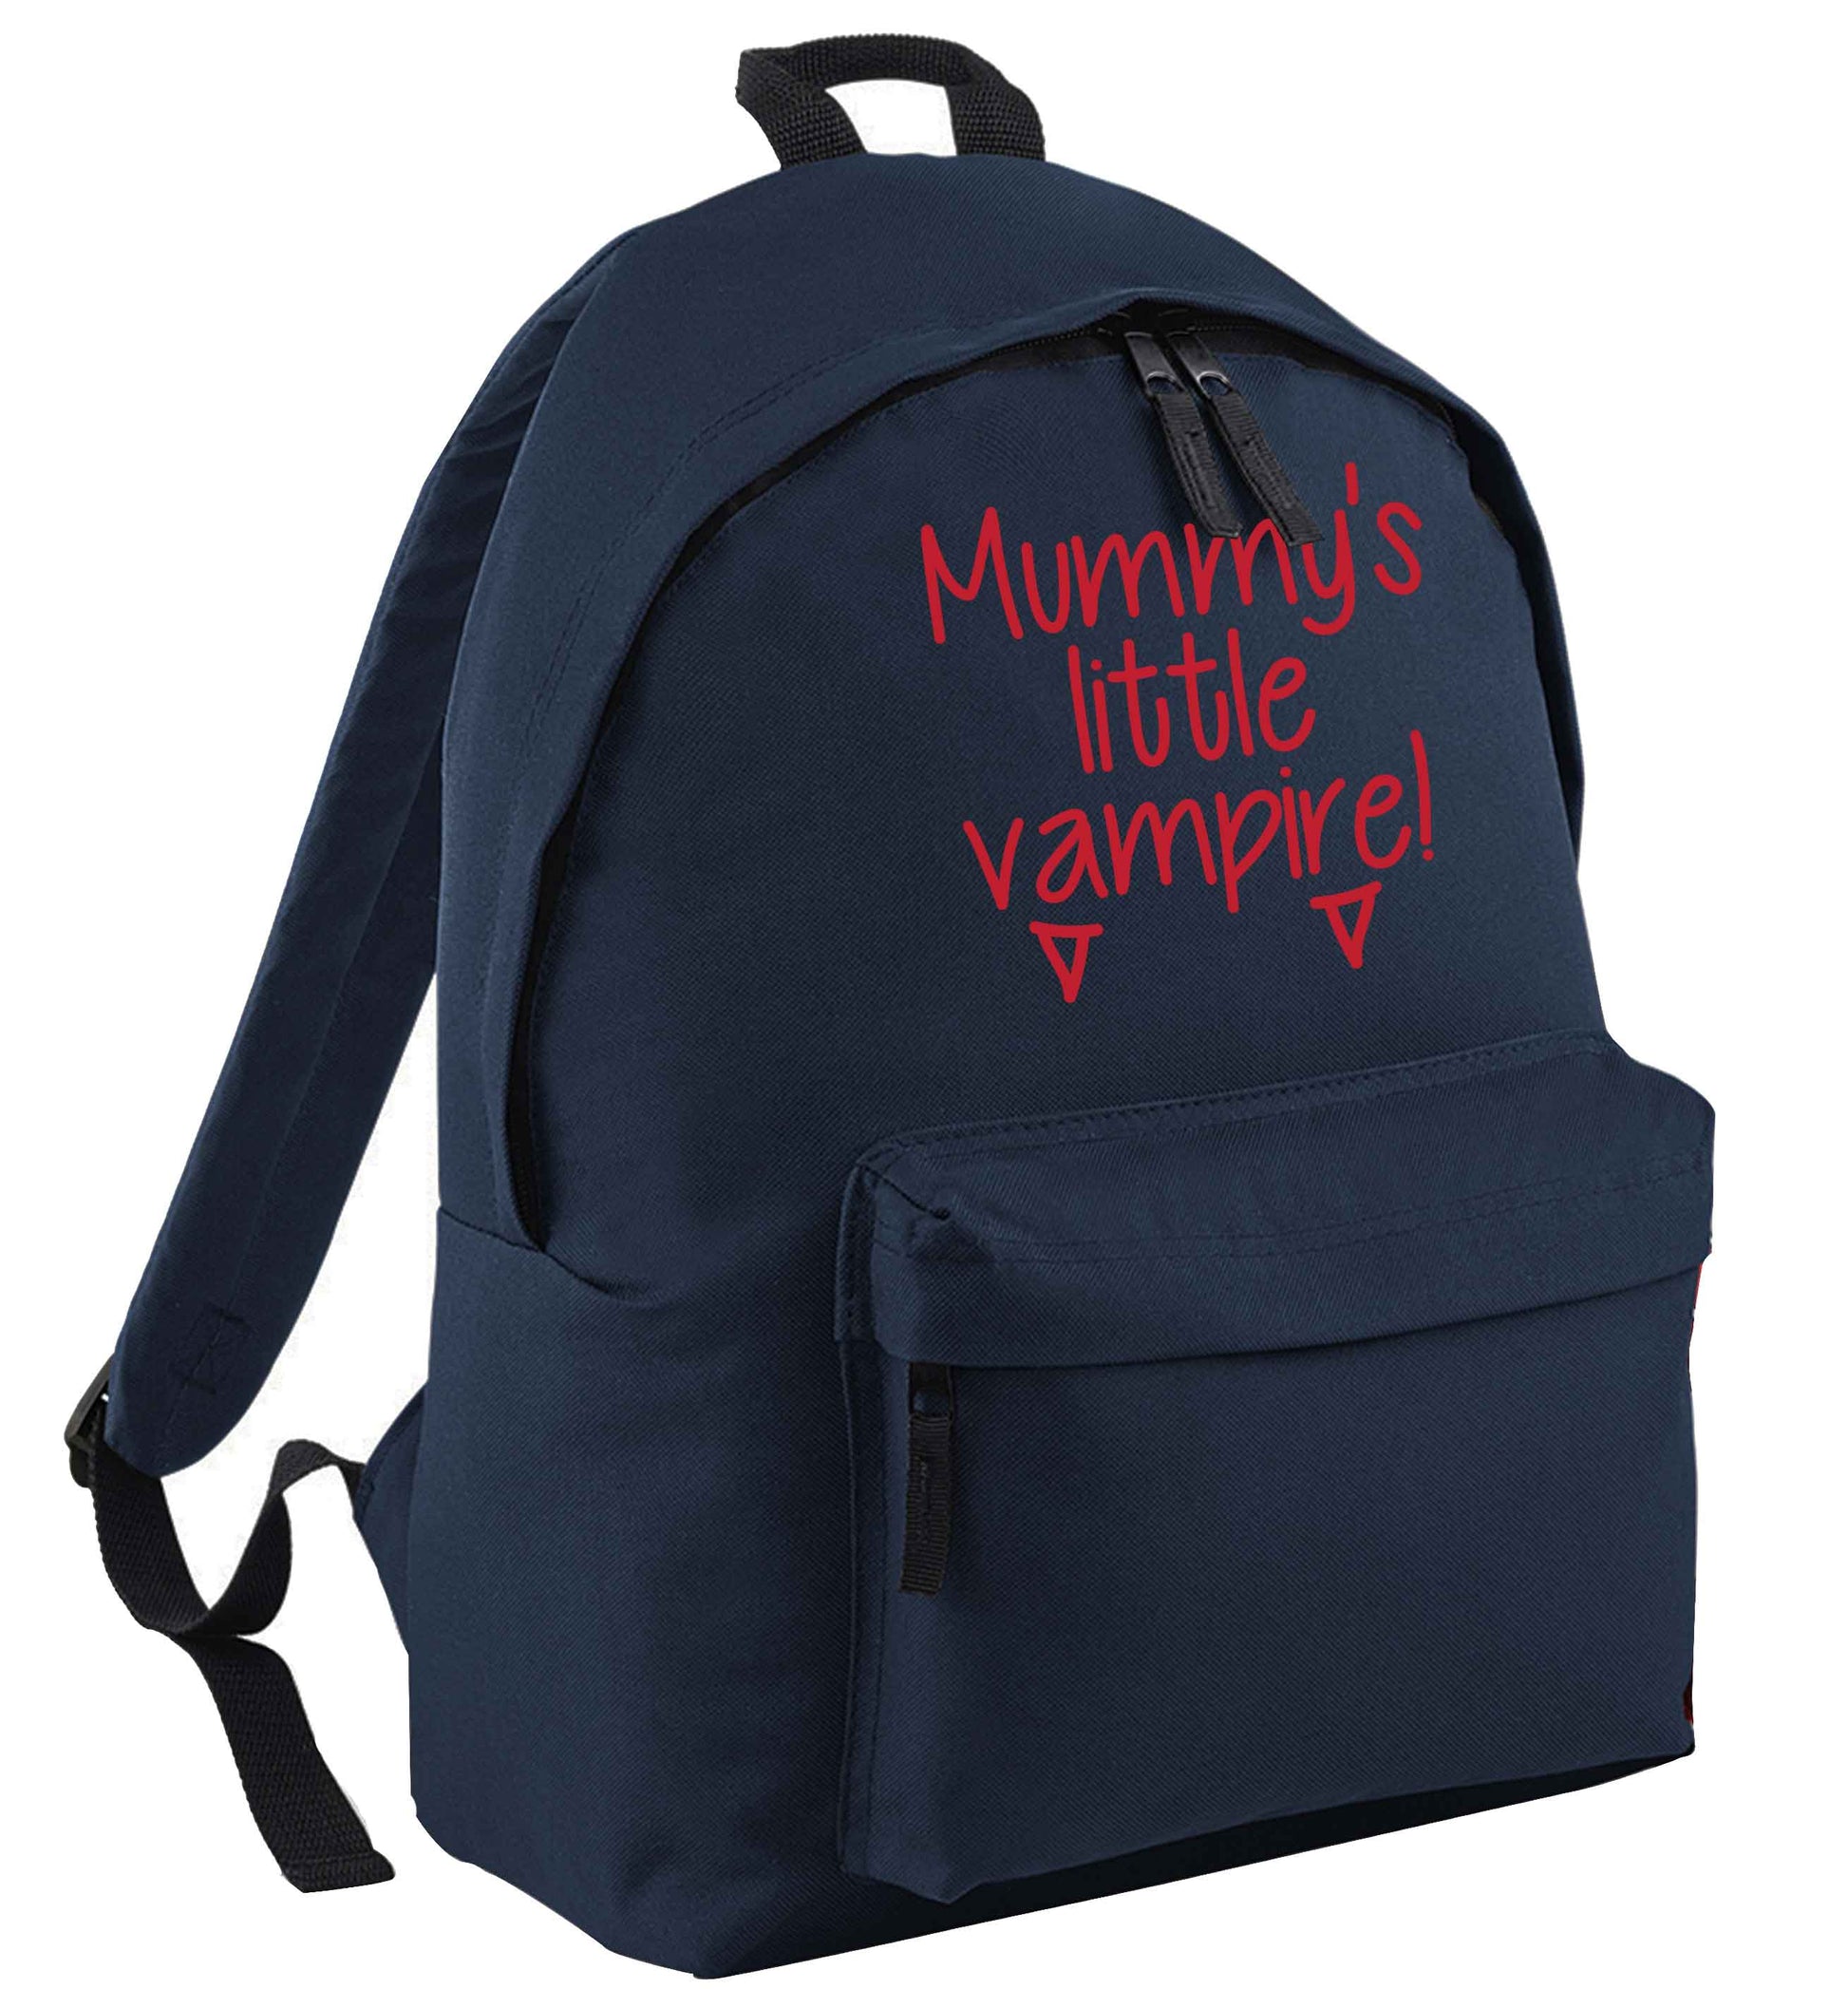 Mummy's little vampire navy adults backpack